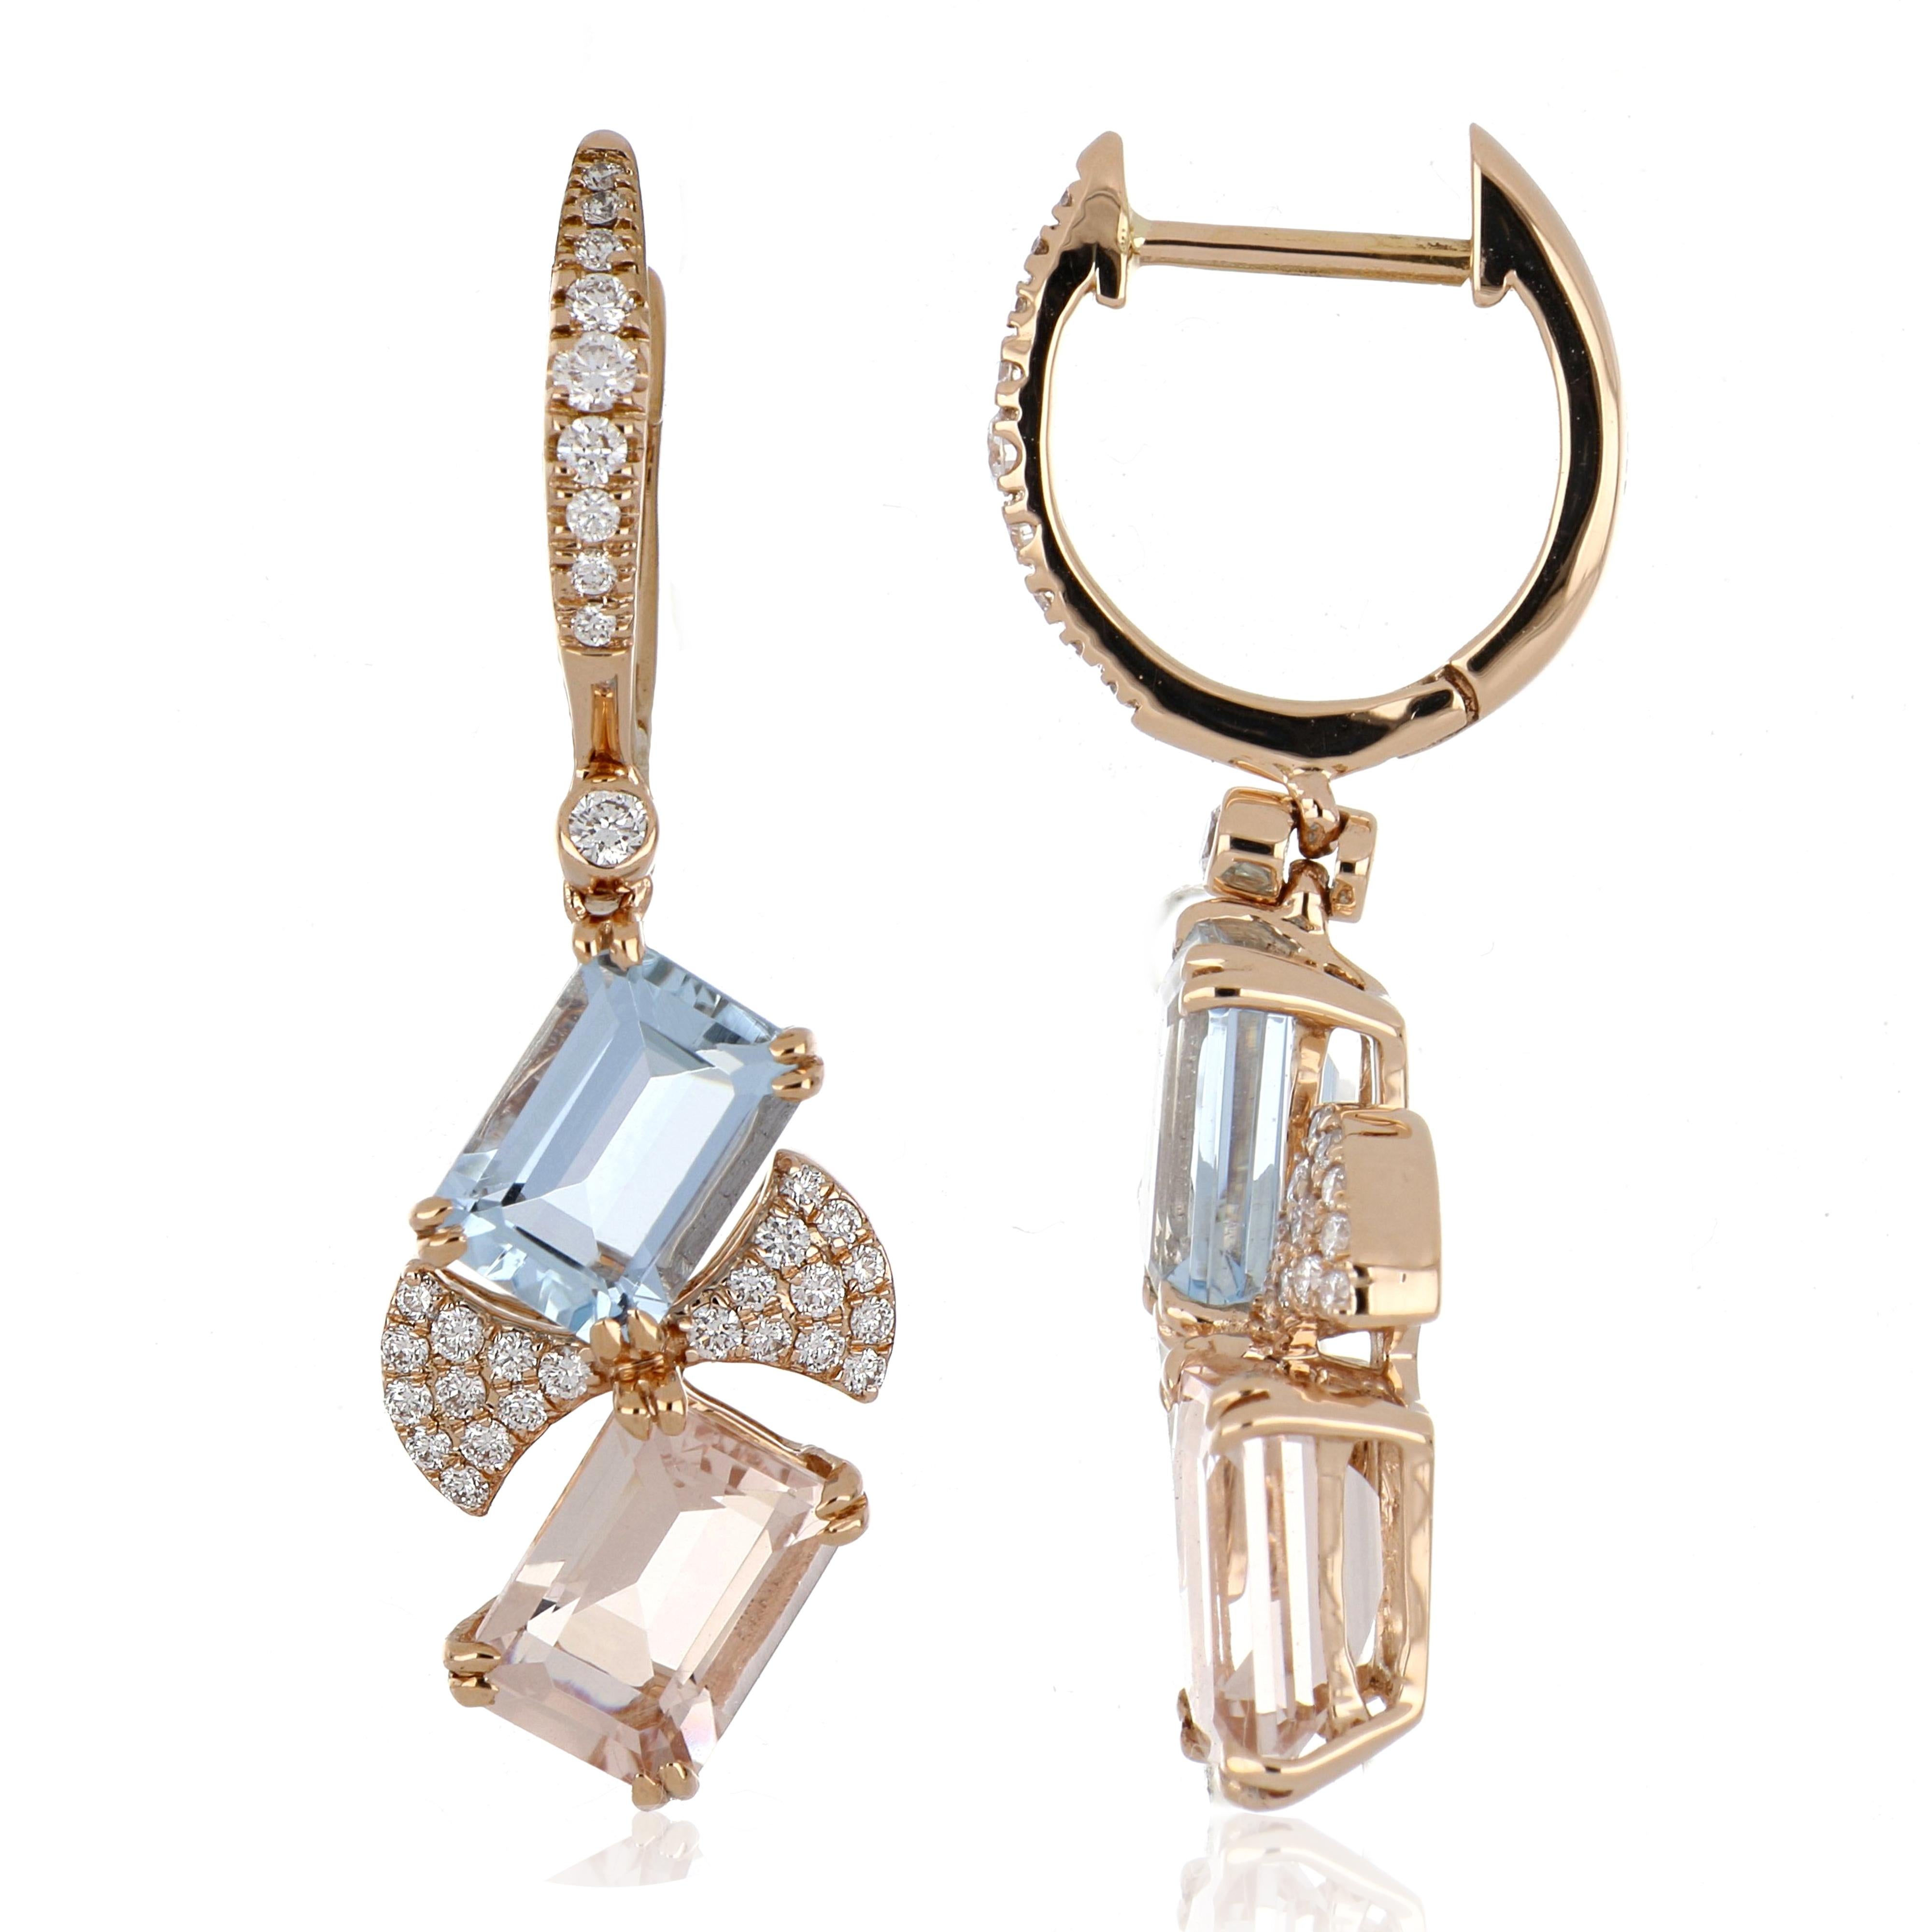 Elegant and Exquisitely detailed Mismatched Dangling Gold Earrings, set with 1.82 Ct (total ) Aquamarine, 1.82 Cts (total)  Morganite, accented with micro pave Diamonds, weighing approx. 0.31 Cts. total carat weight. Beautifully Hand crafted in 18